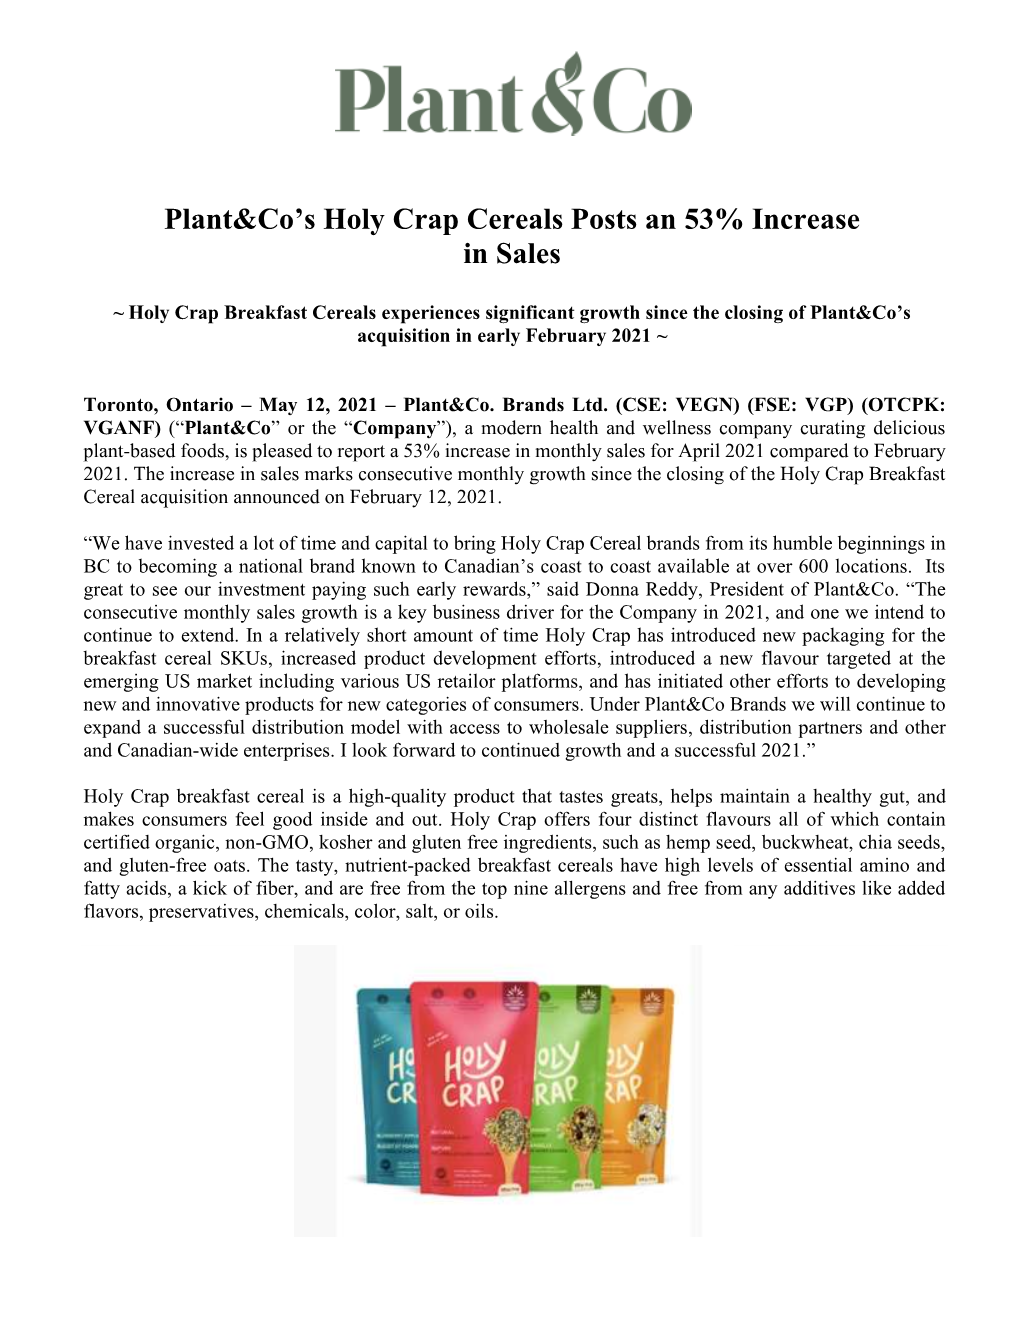 Plant&Co's Holy Crap Cereals Posts an 53% Increase in Sales